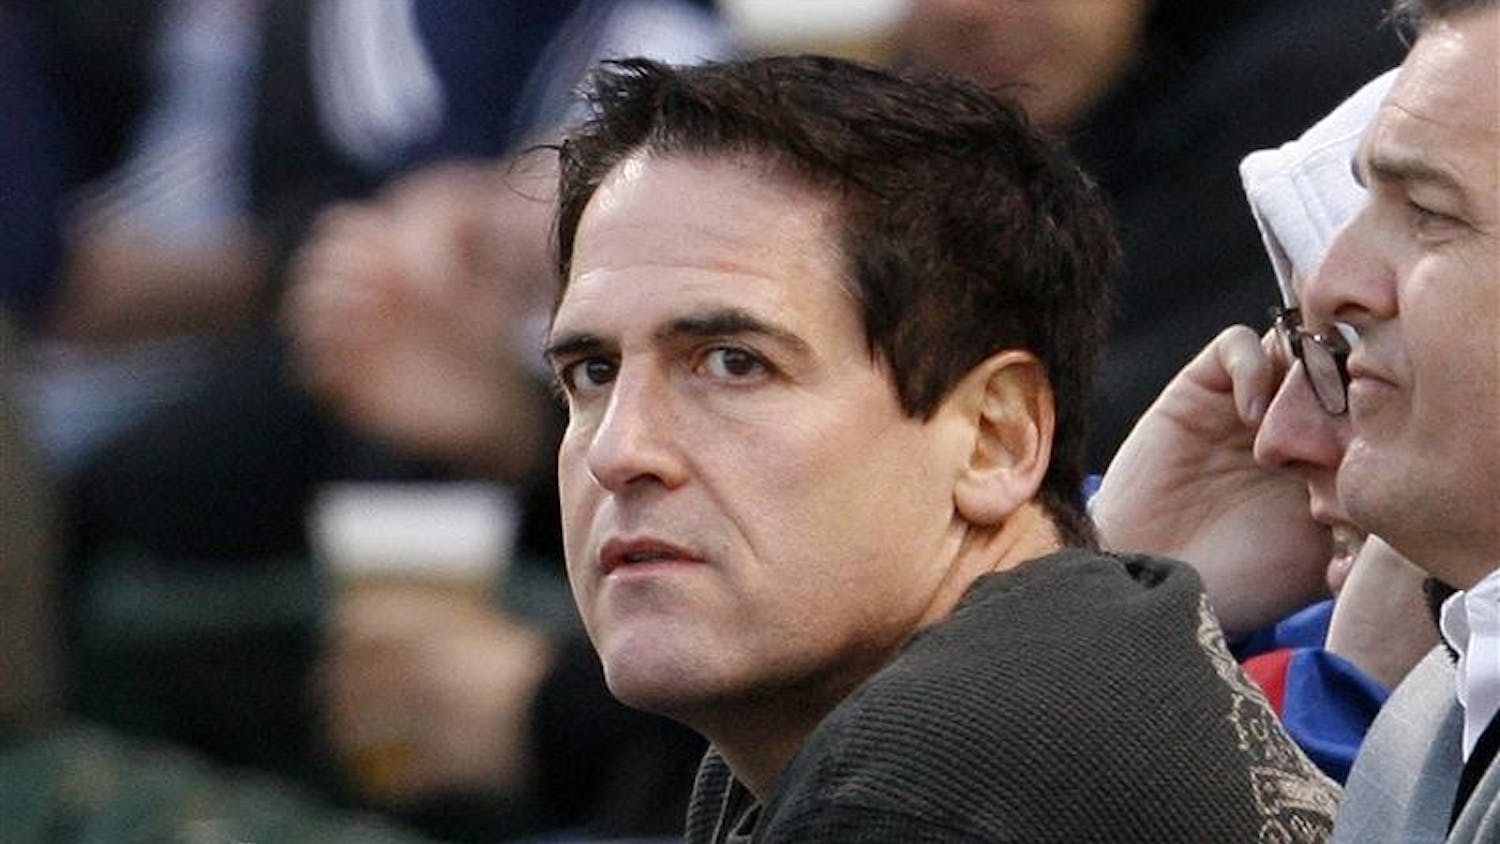 In this April 30, 2008 file photo, Mark Cuban, owner of the Dallas Mavericks NBA basketball team, watches the Chicago Cubs play the Milwaukee Brewers in the first inning of a baseball game in Chicago. Since buying the Dallas Mavericks eight years ago, Mark Cuban has been called a lot of unpleasant things: NBA nuisance, meddling owner, even a bad dancer. Now Cuban is facing the most serious allegation yet - insider trading. 